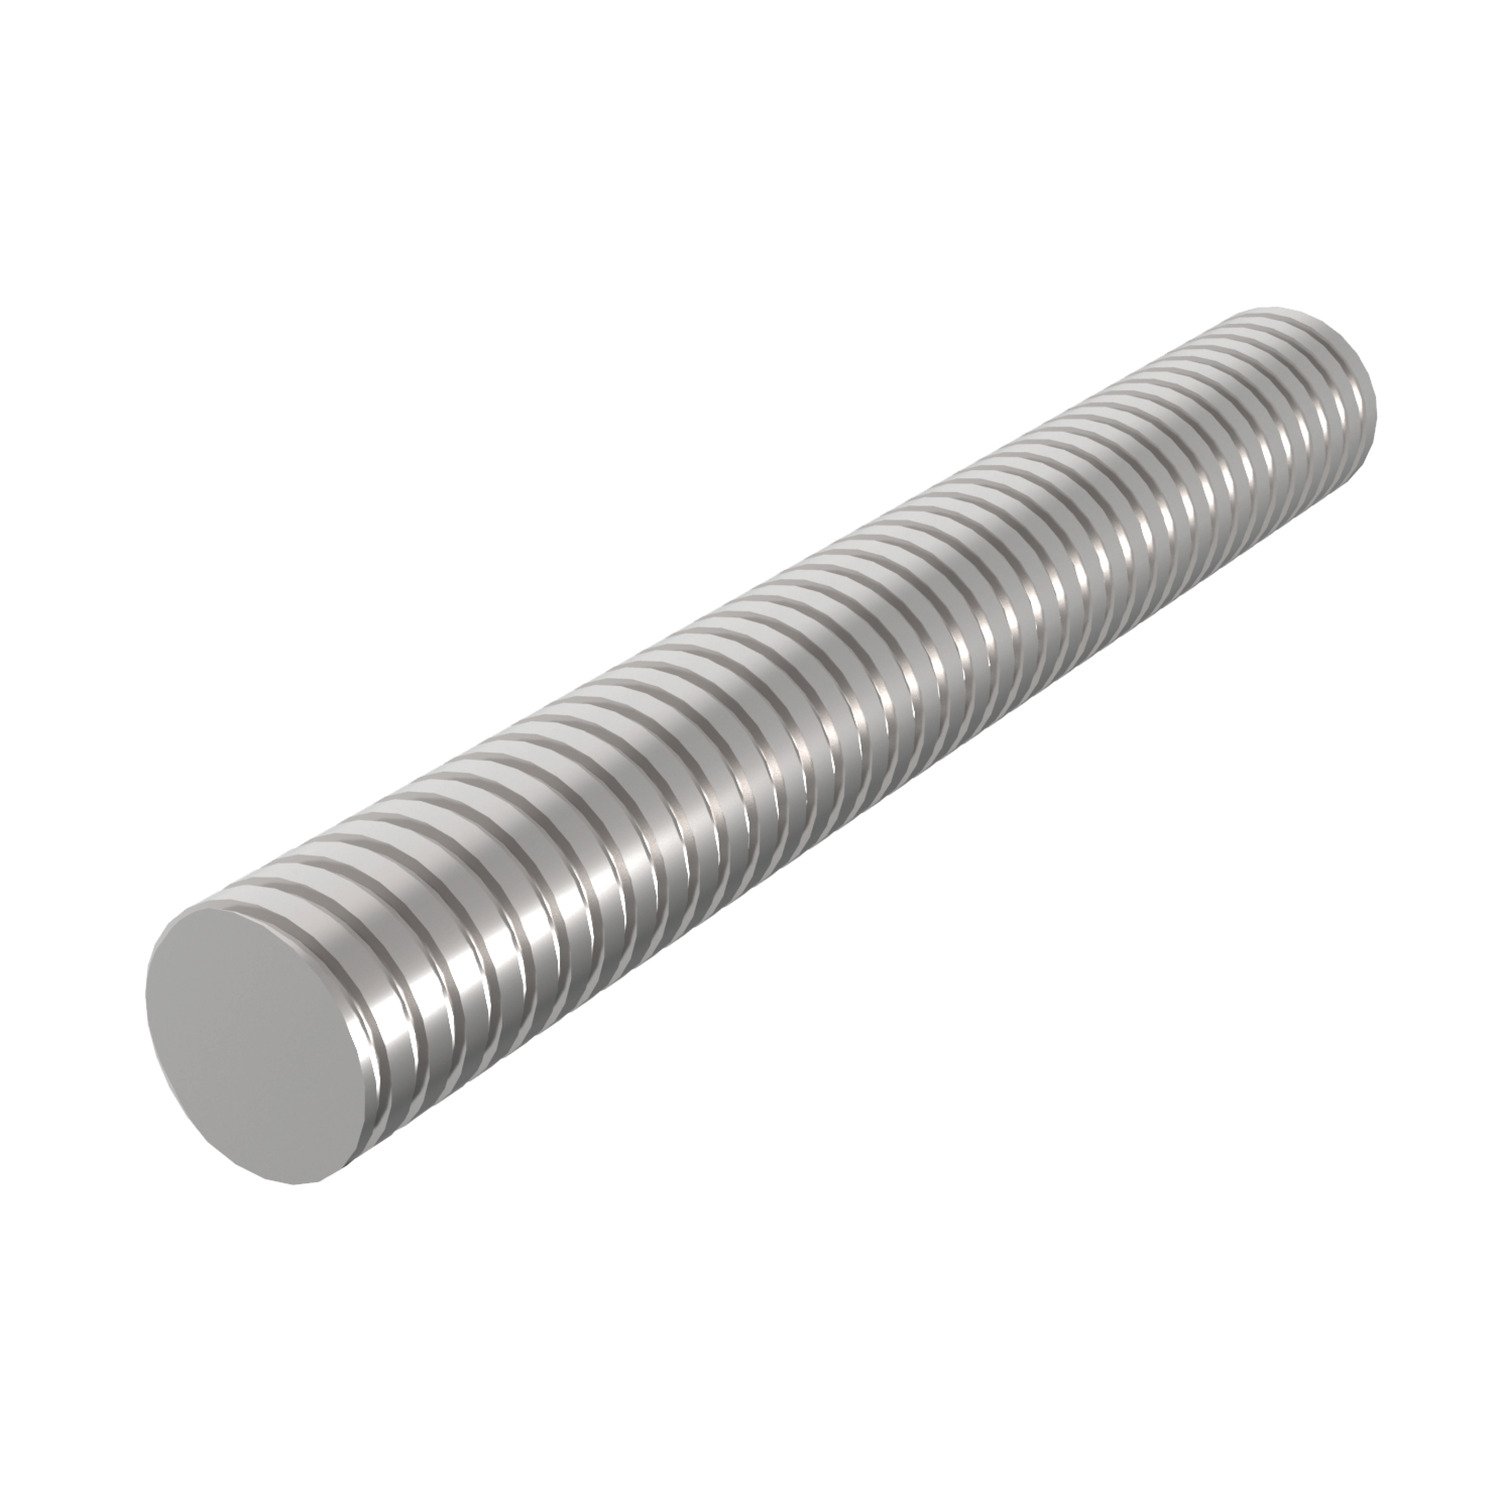 L1325.R12-03-1.0 Stainless leadscrew Ø12x3 1.0 RH A2 Stainless Steel